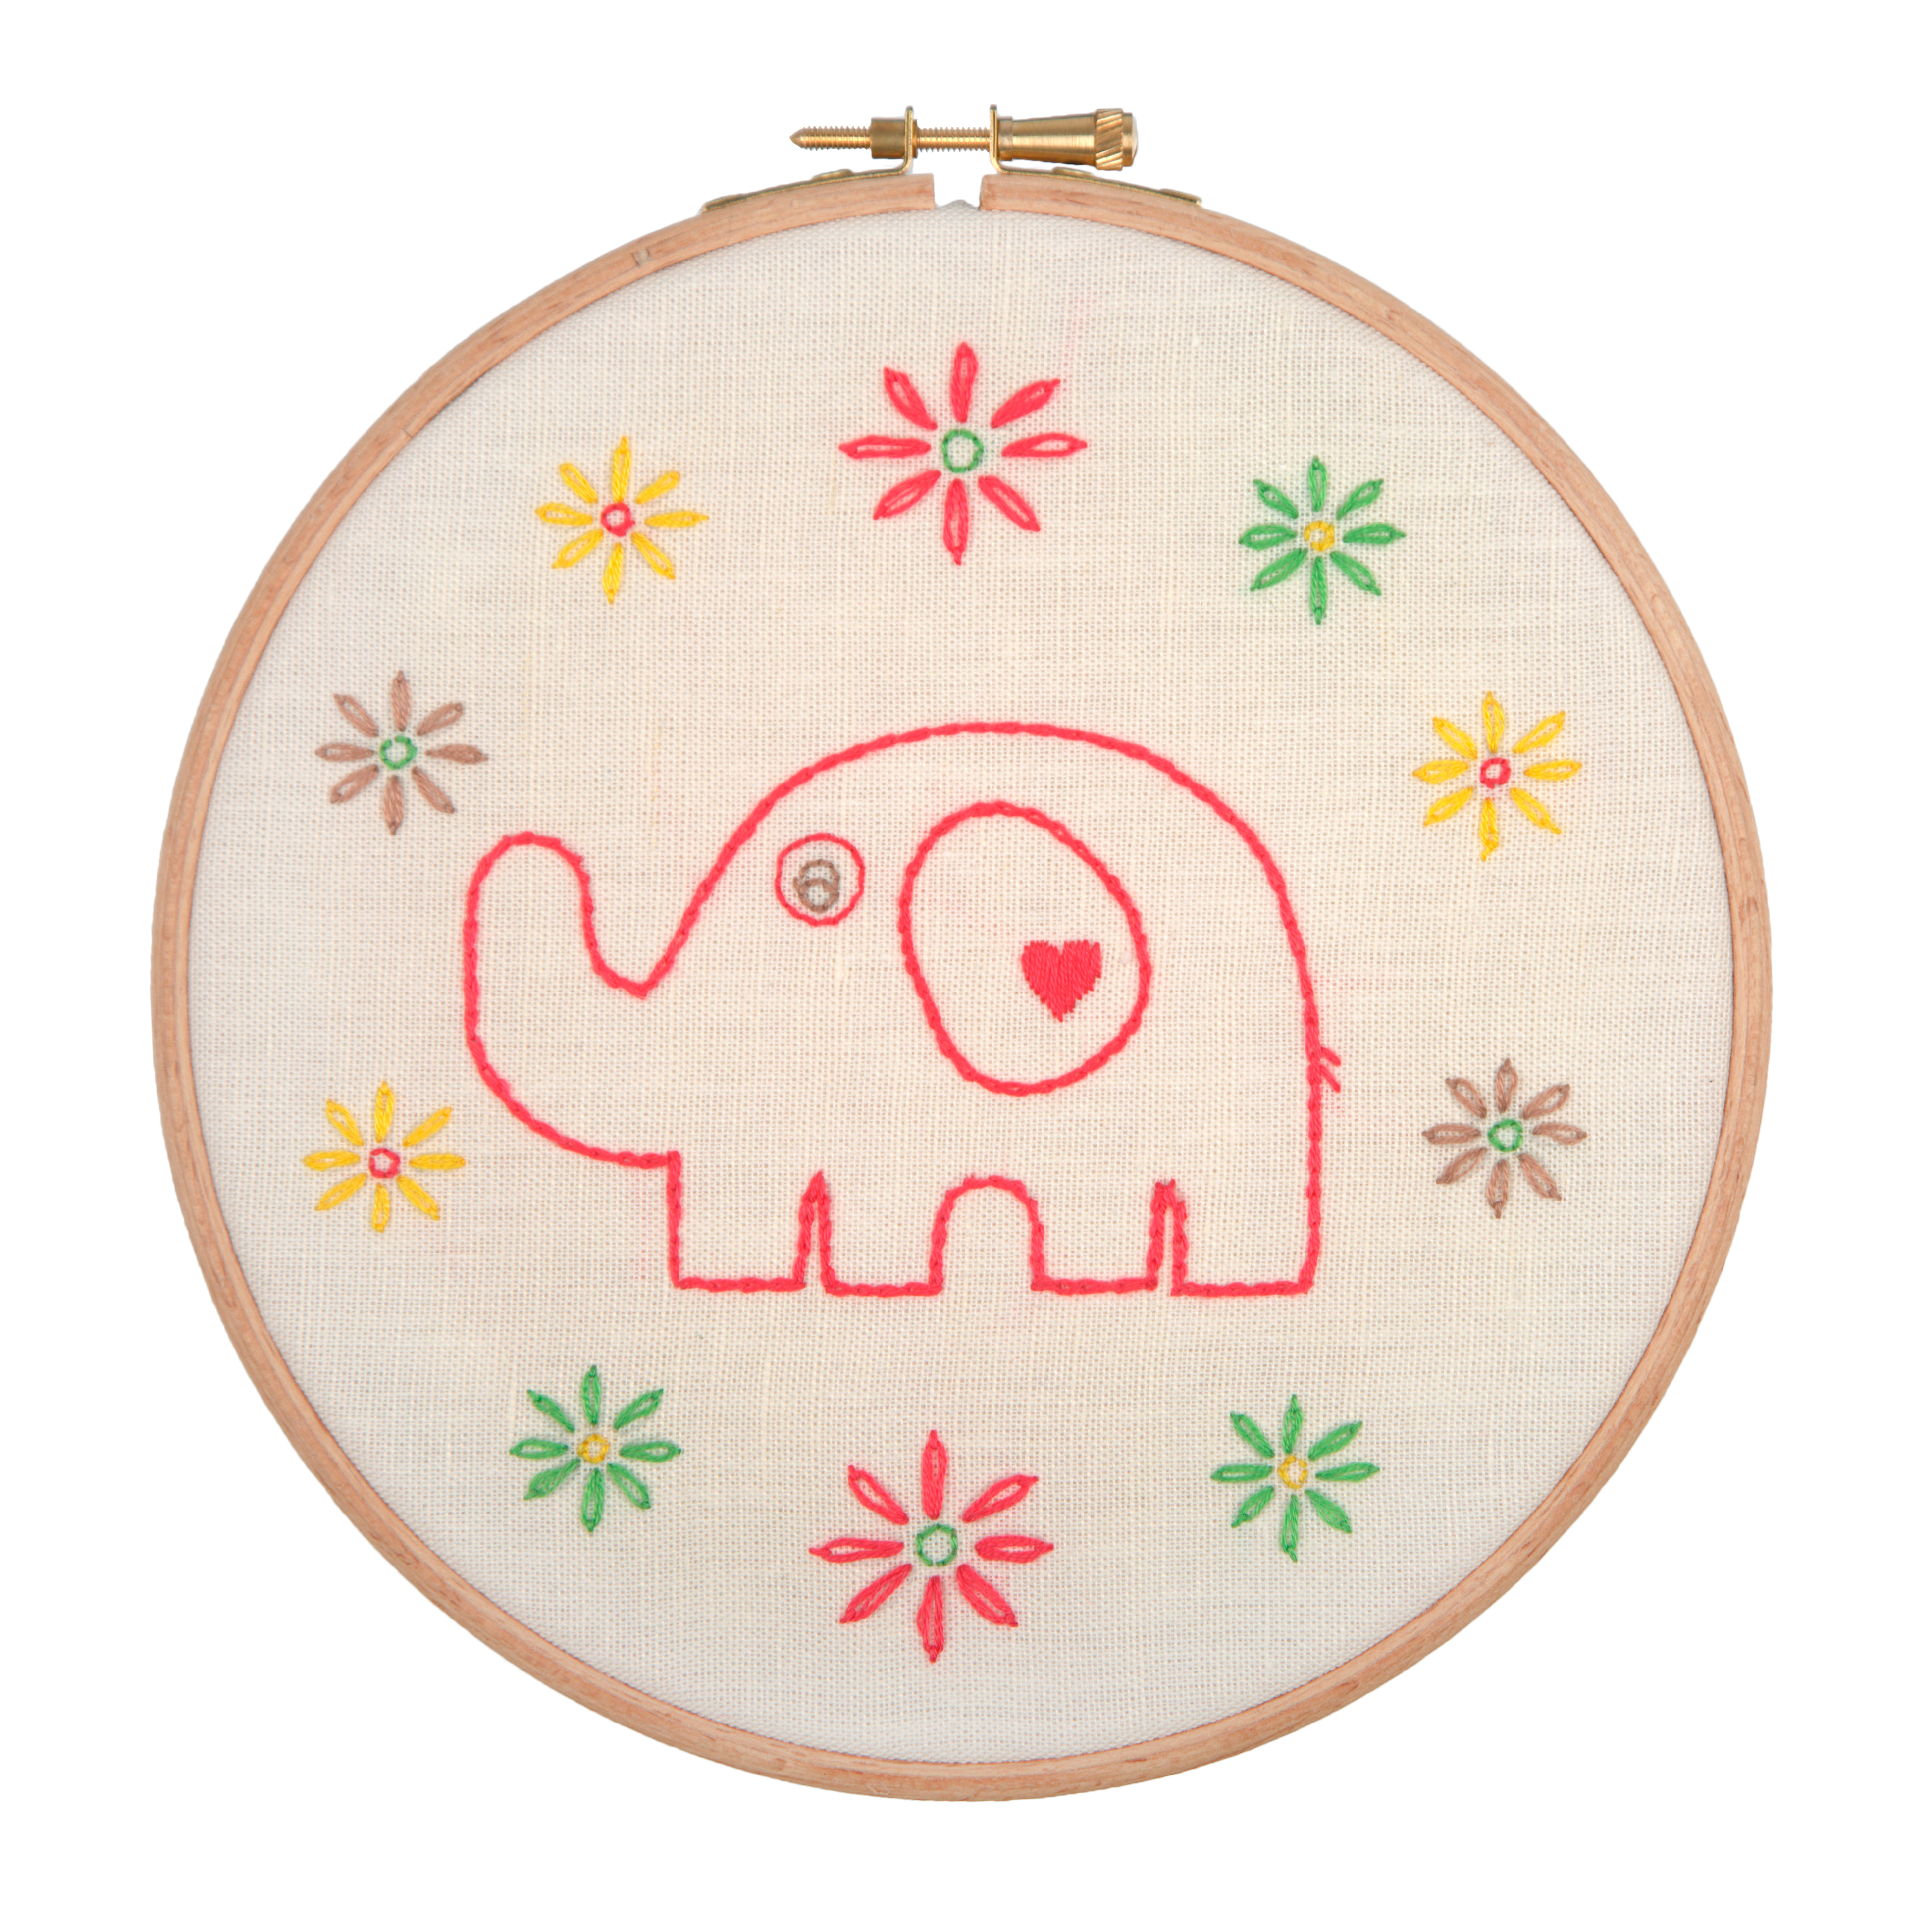 Elephant Embroidery Kit for Beginners - Hand Embroidery at Weekend Kits